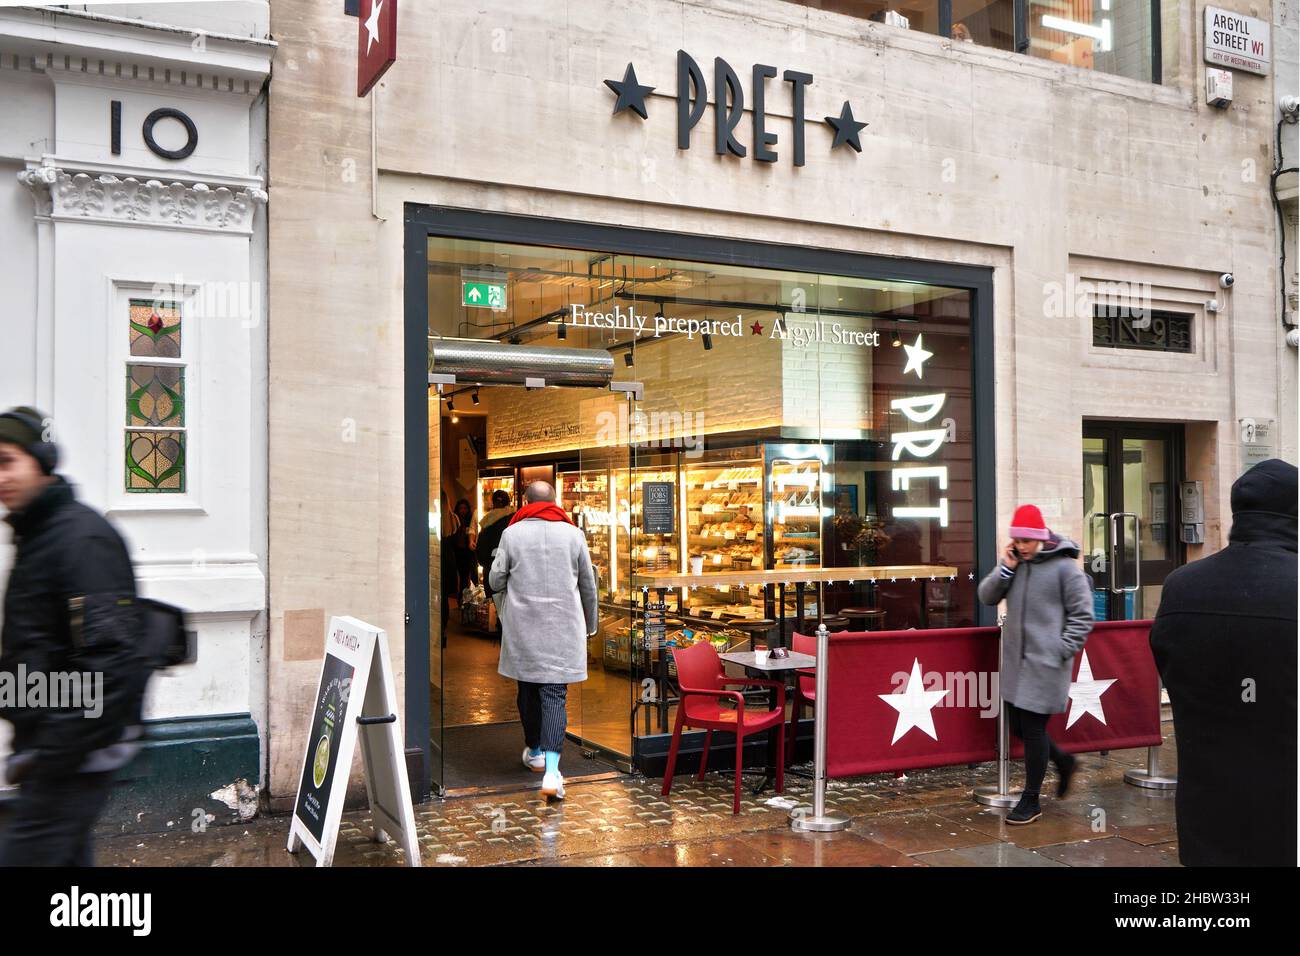 London, United Kingdom - February 01, 2019: Pedestrians walking in front Pret a Manger sandwich shop at one of their branch in central London on cold Stock Photo